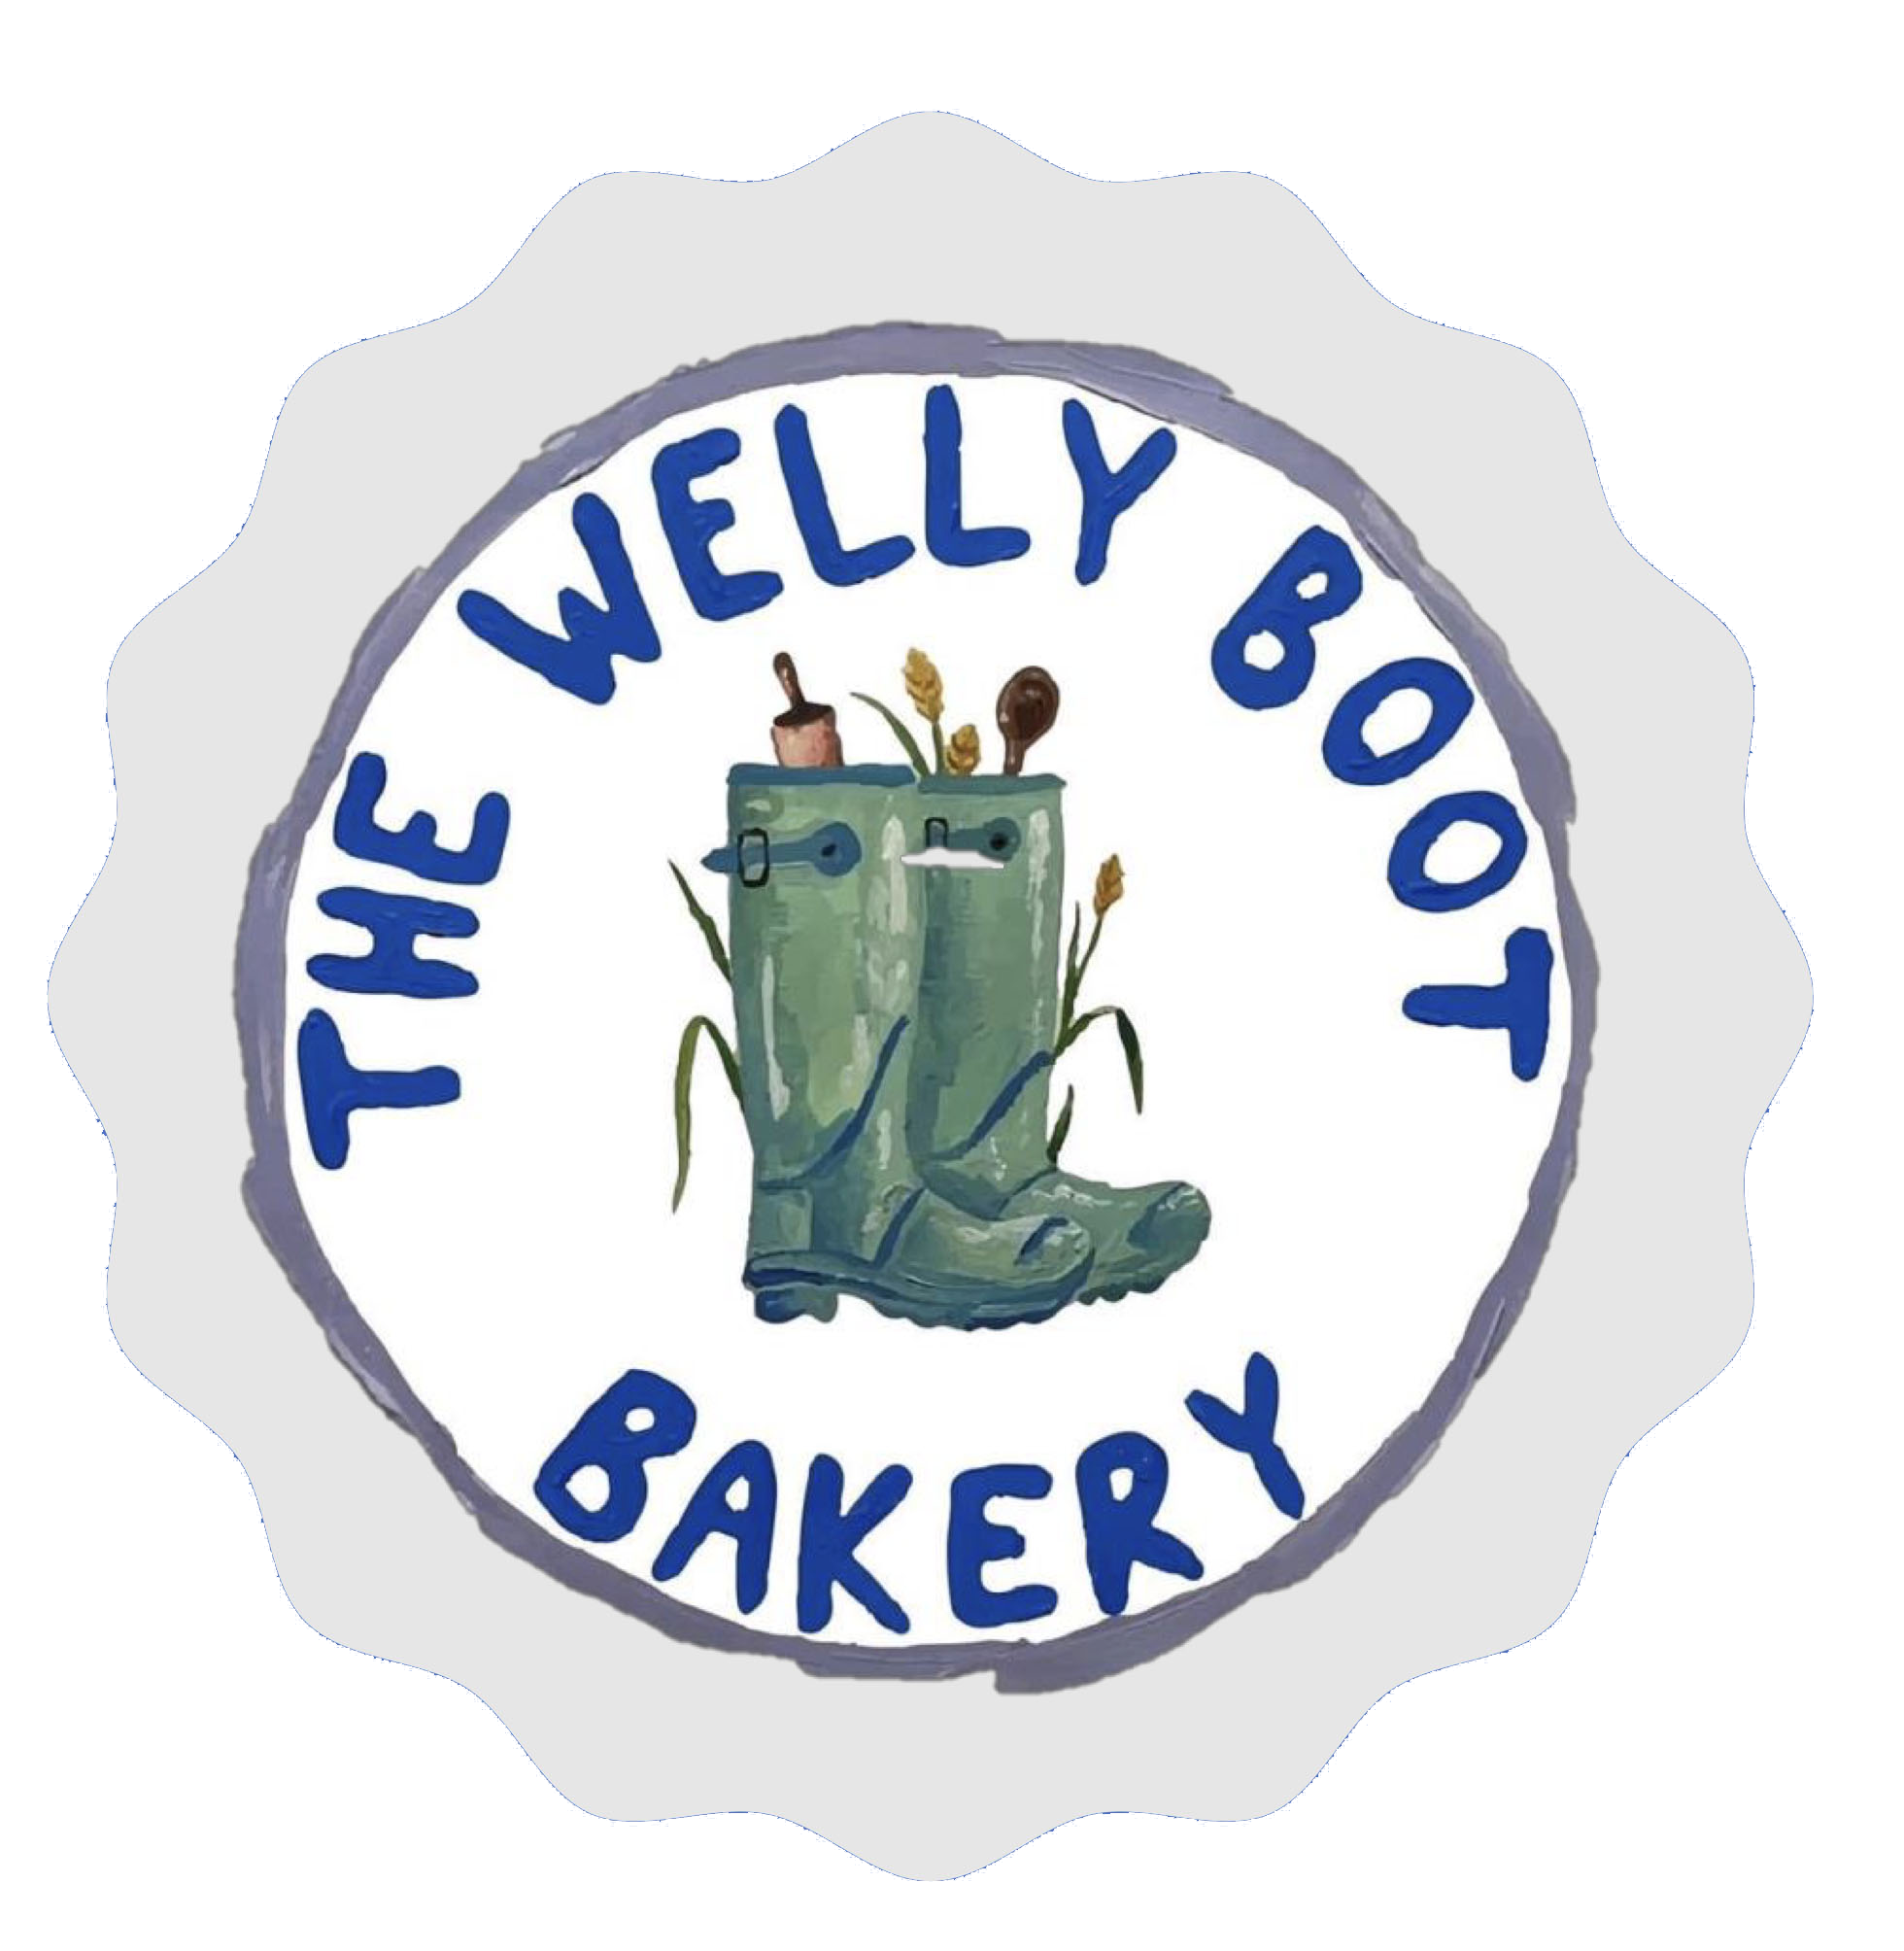 The Welly Boot Bakery